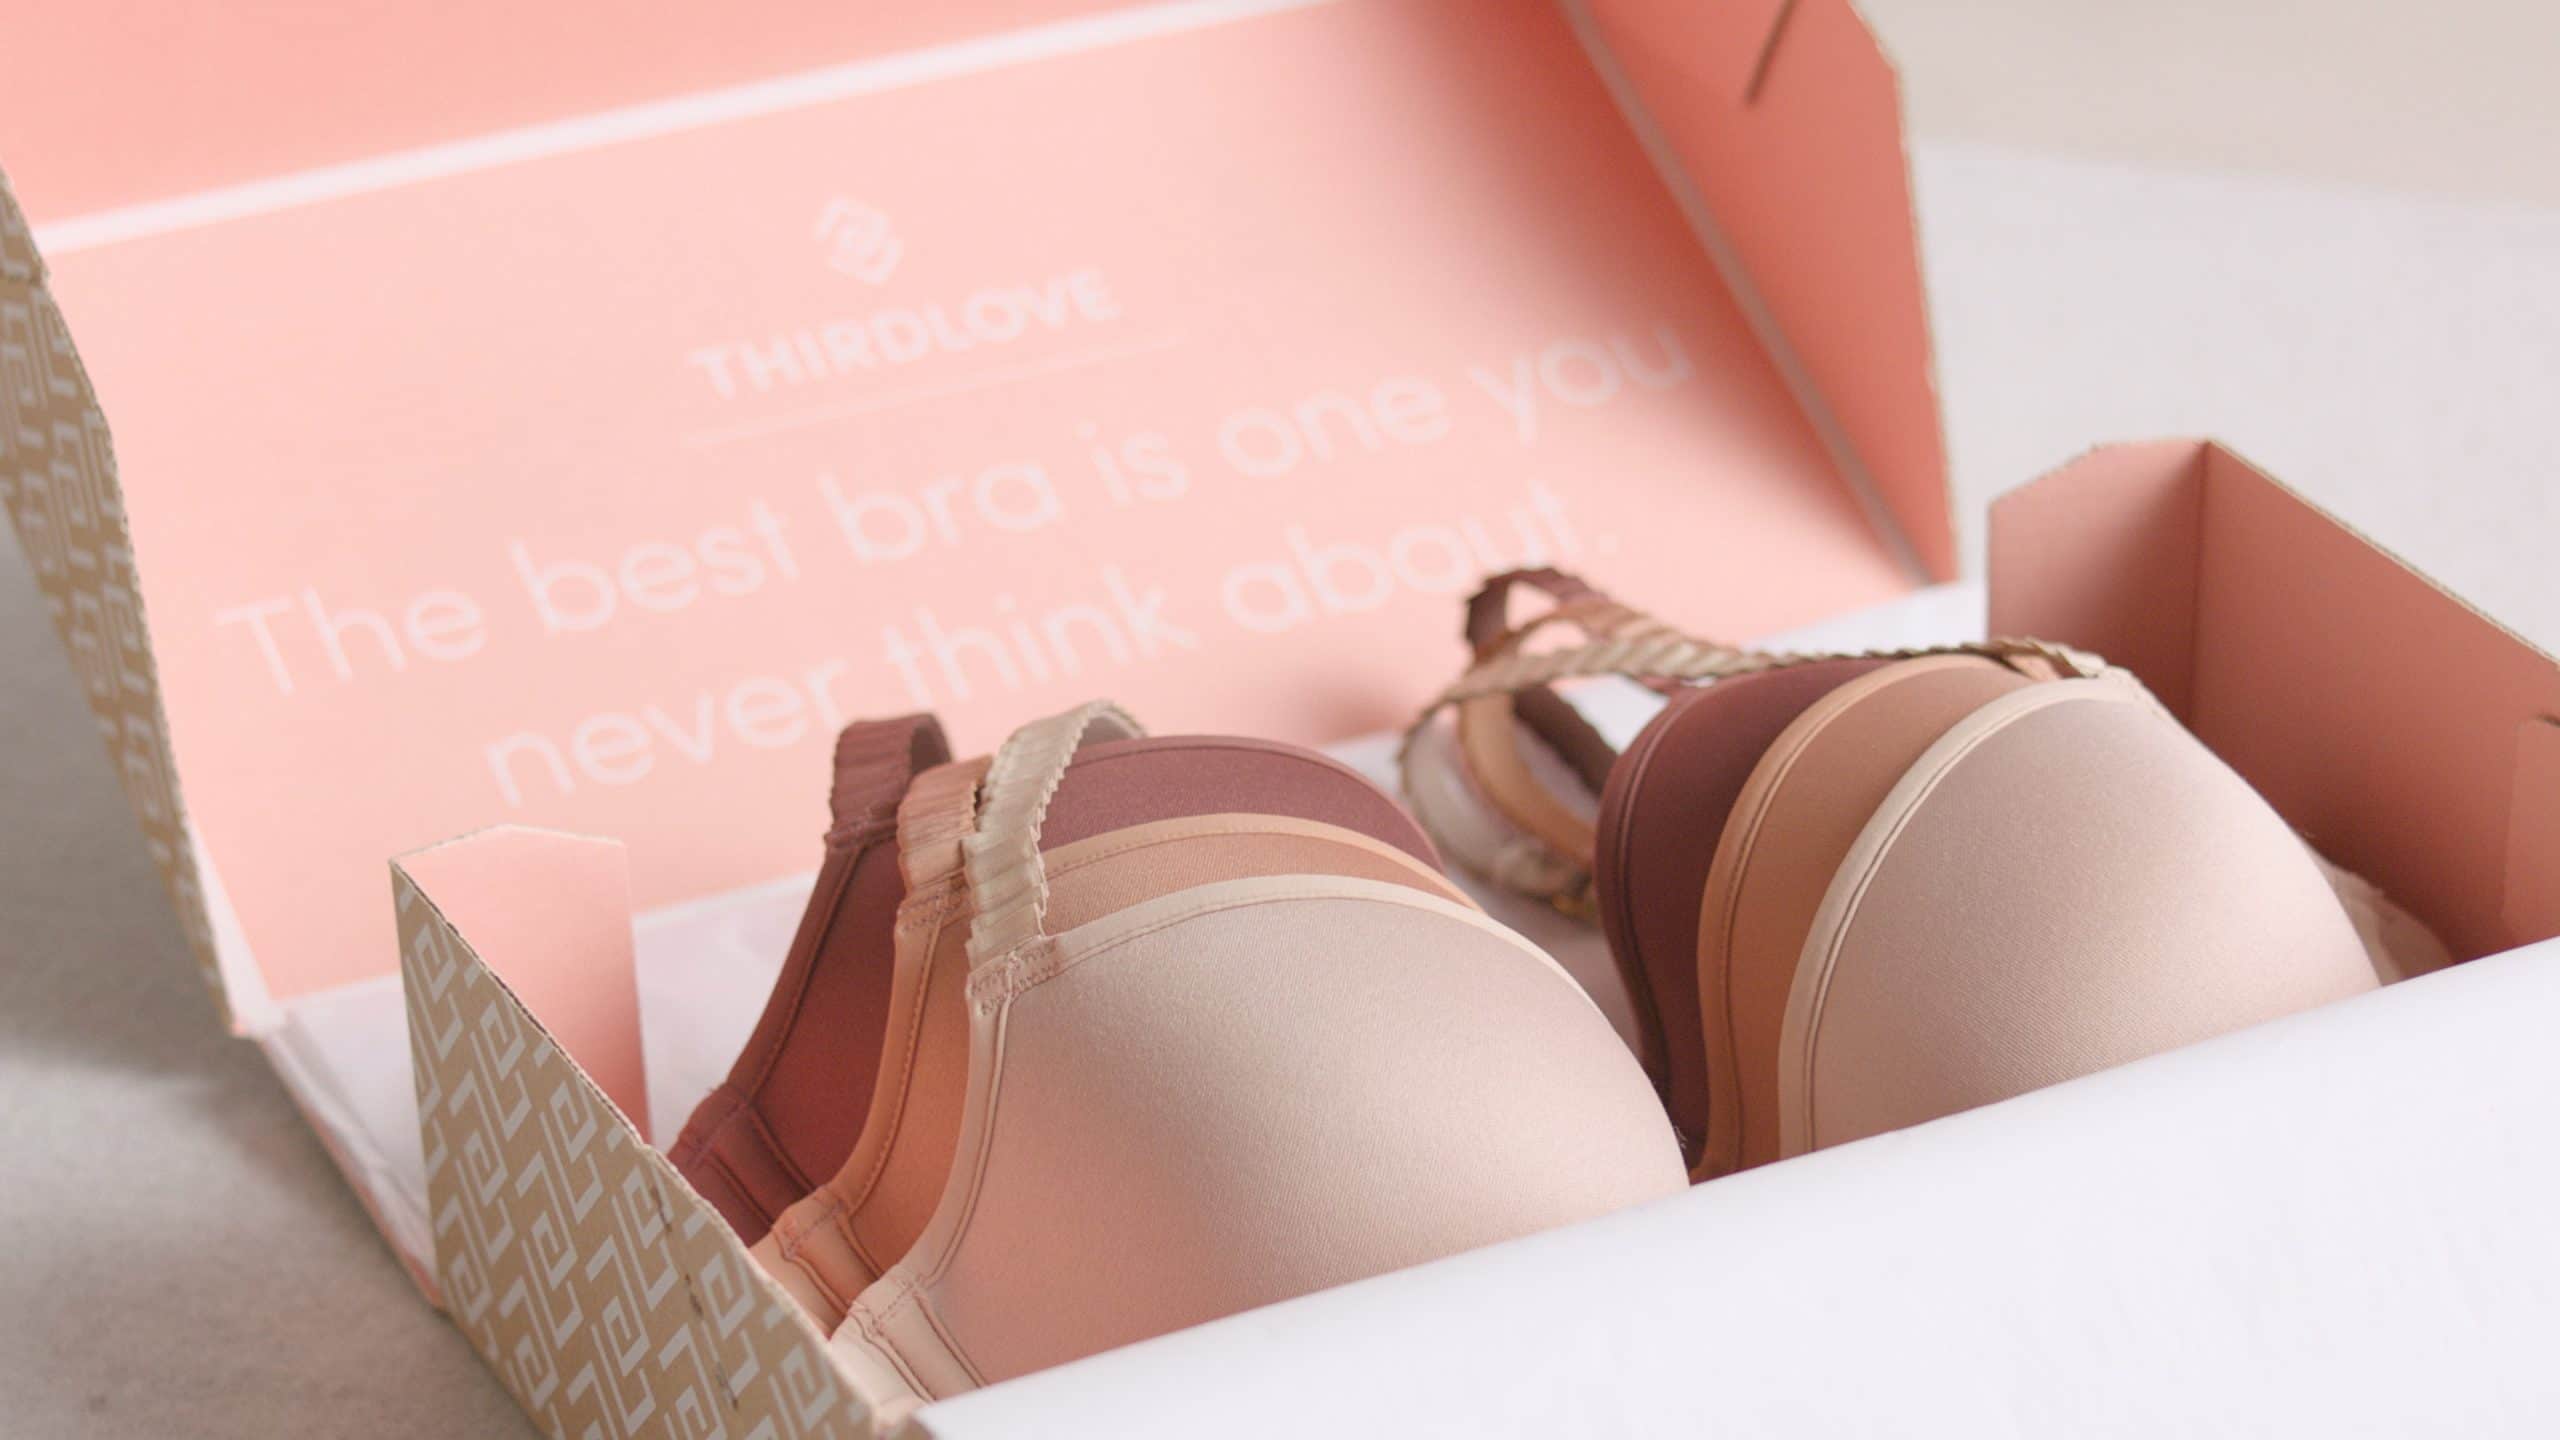 Customized bra packaging boxes